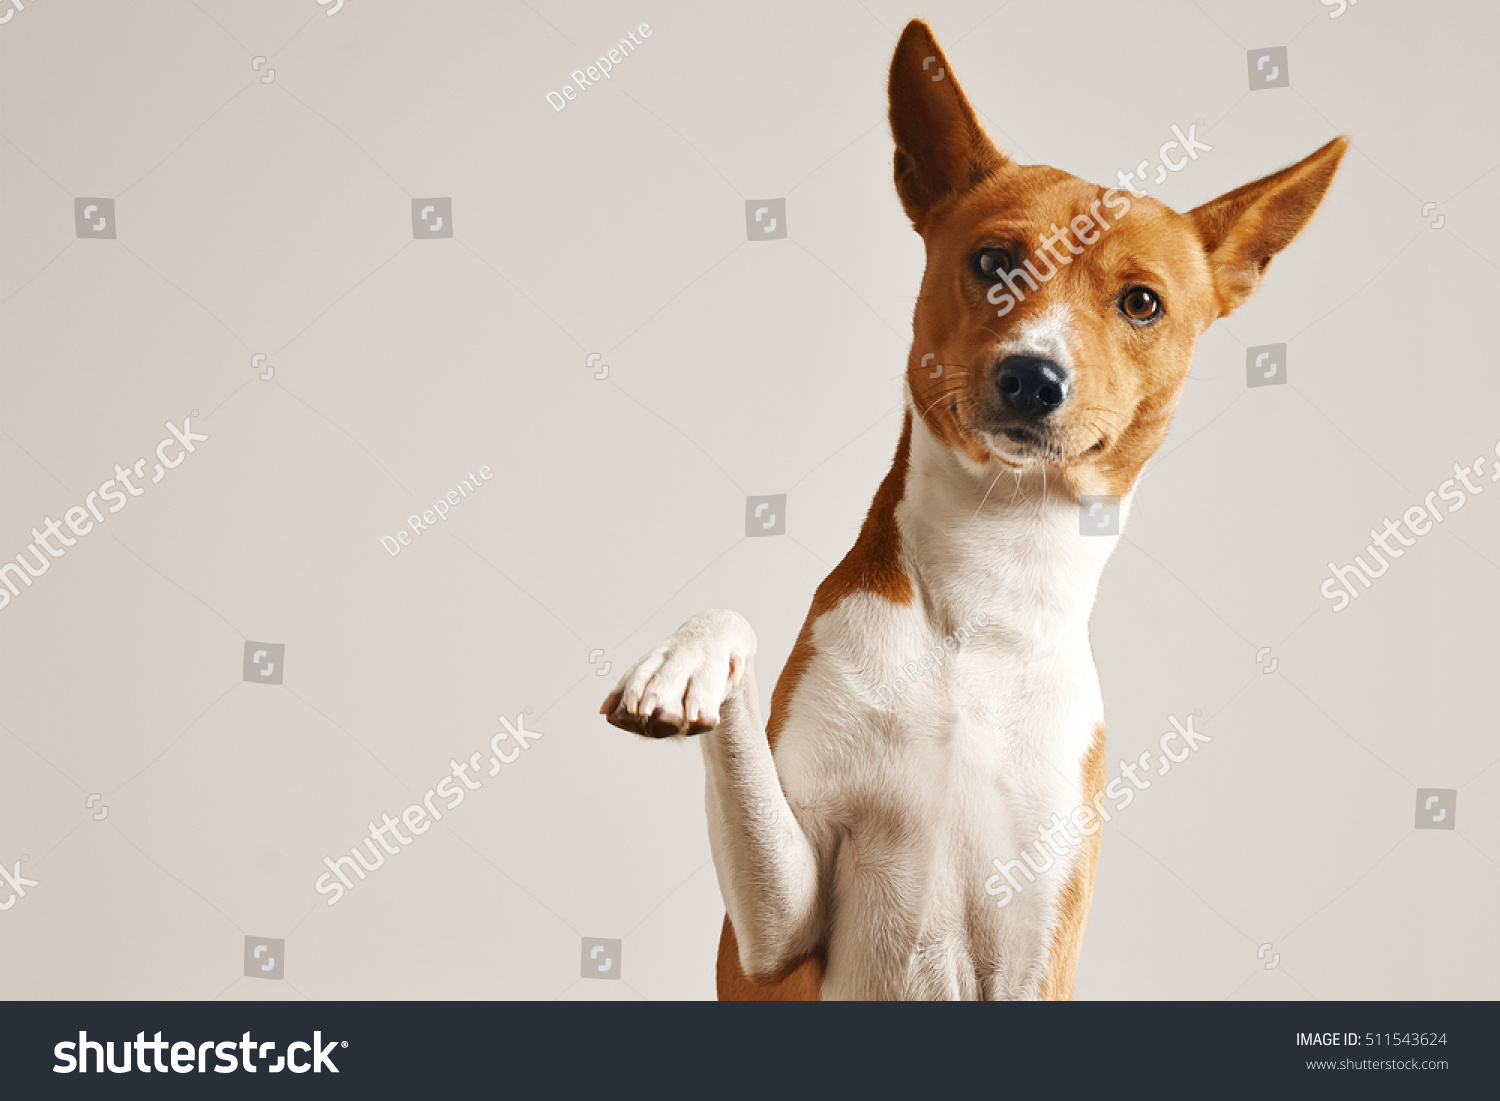 Friendly smart basenji dog giving his paw close up isolated on white #511543624